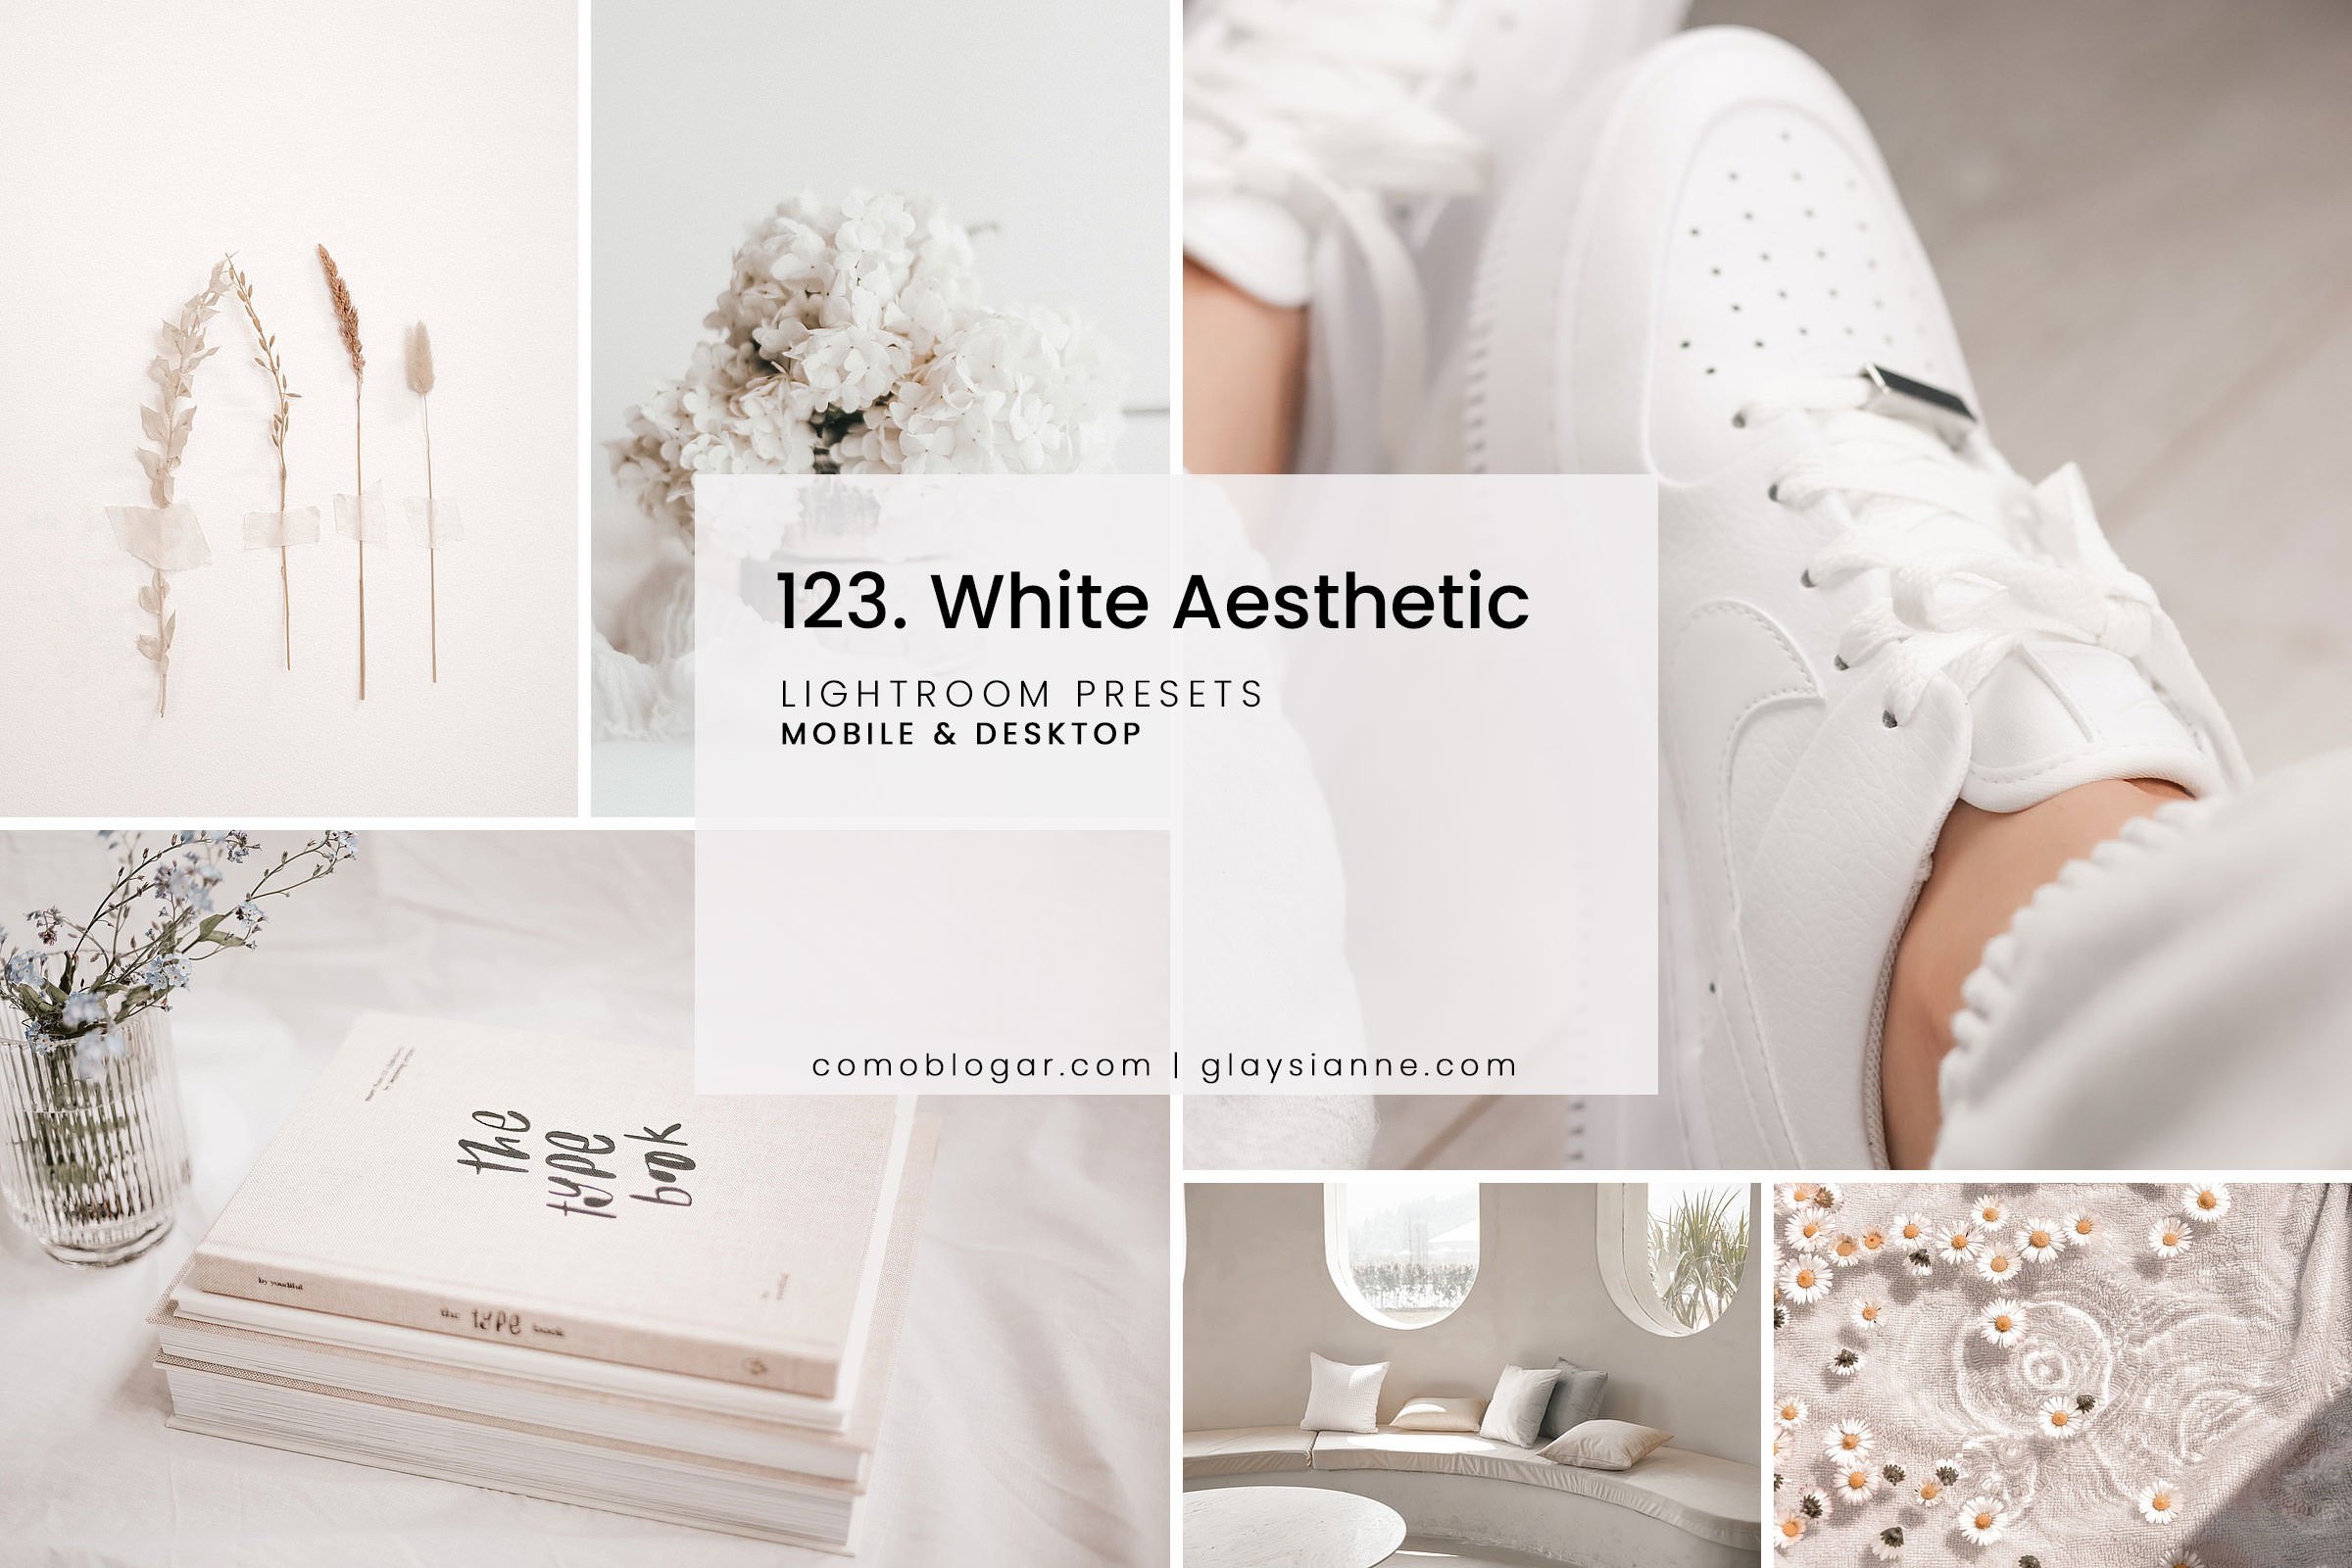 123. White Aestheticcover image.